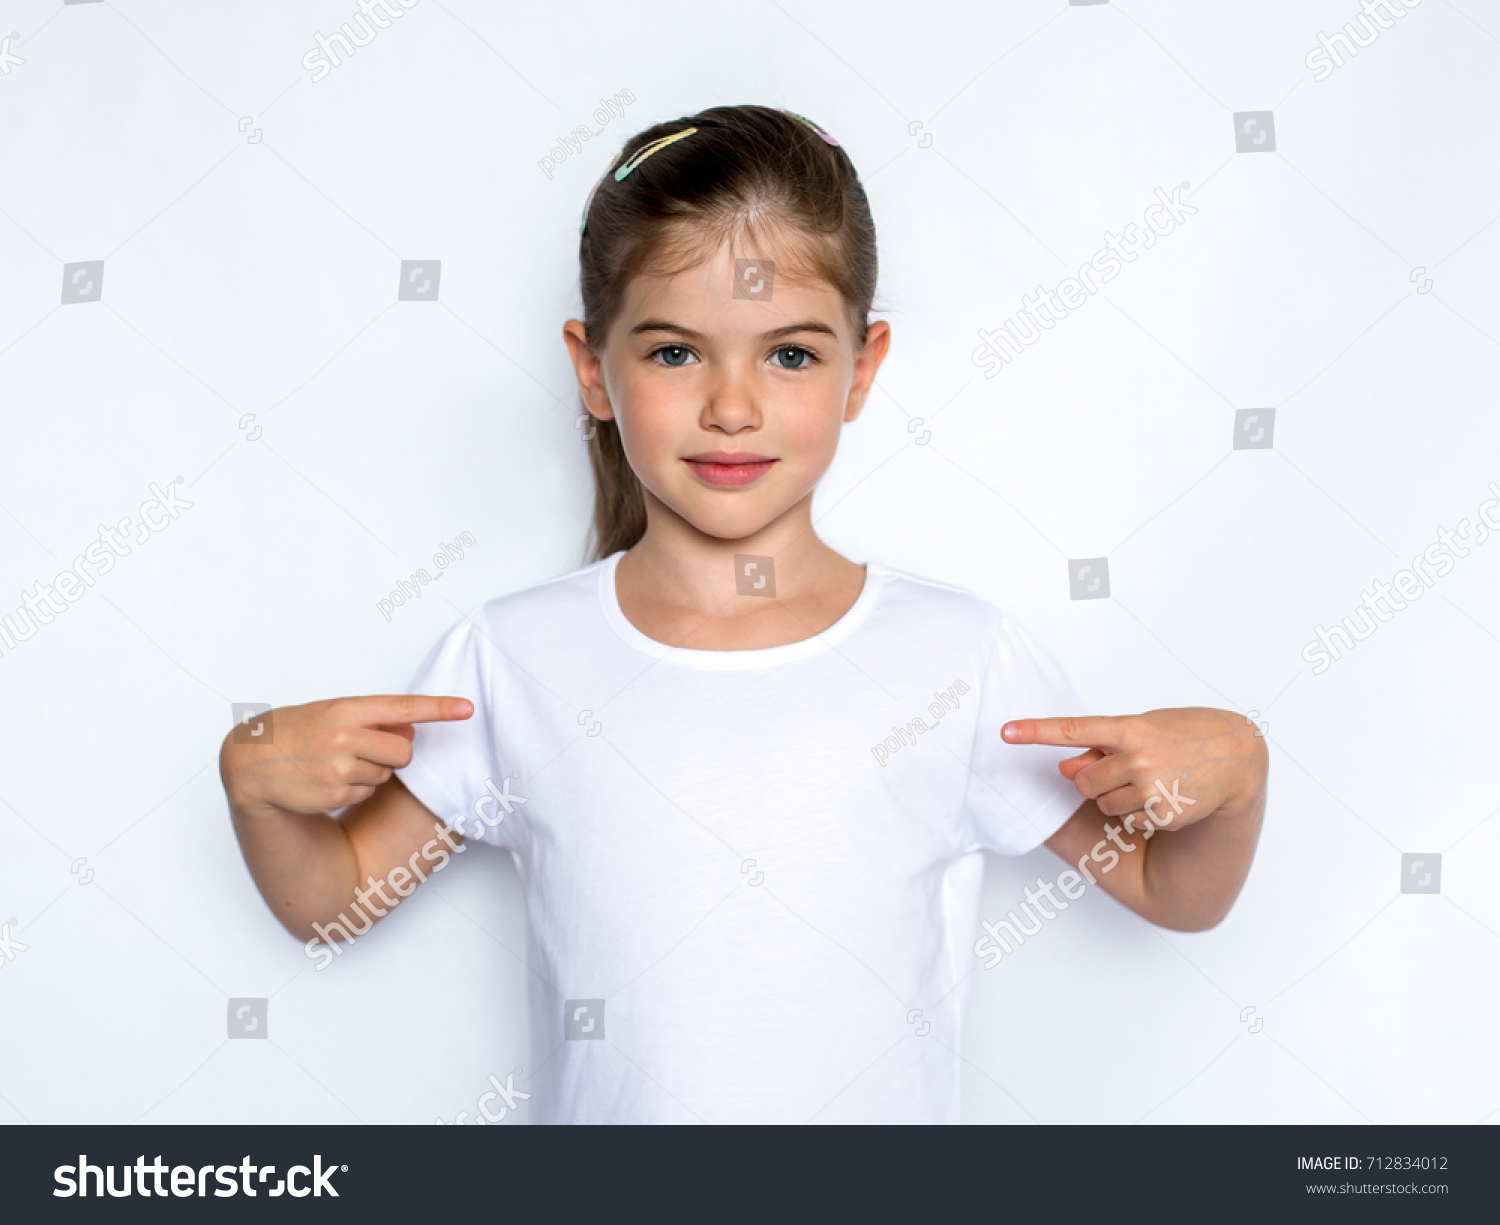 stock-photo-t-shirt-design-concept-smiling-little-girl-in-blank-white-t-shirt-pointing-at-herself-712834012.jpg